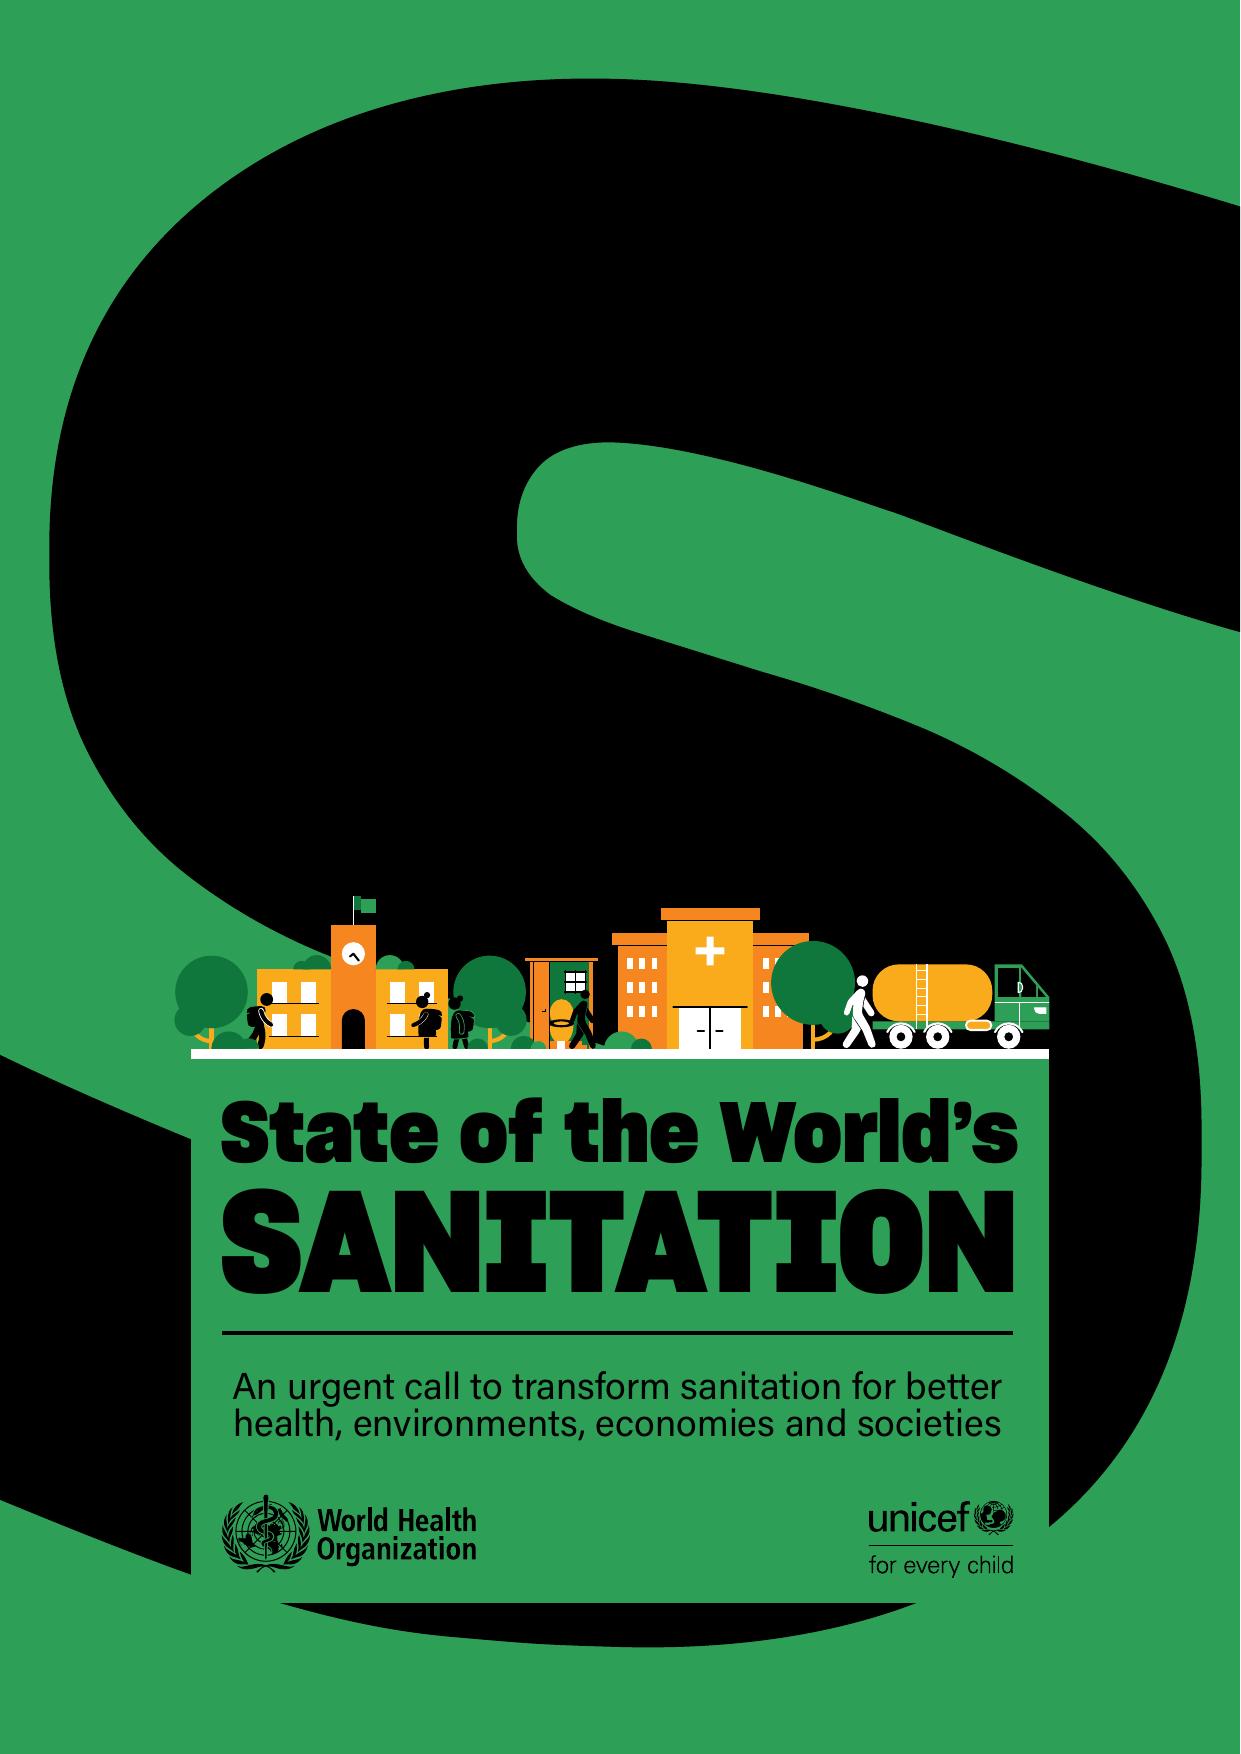 UNICEF-WHO-state-of-the-worlds-sanitation-2020